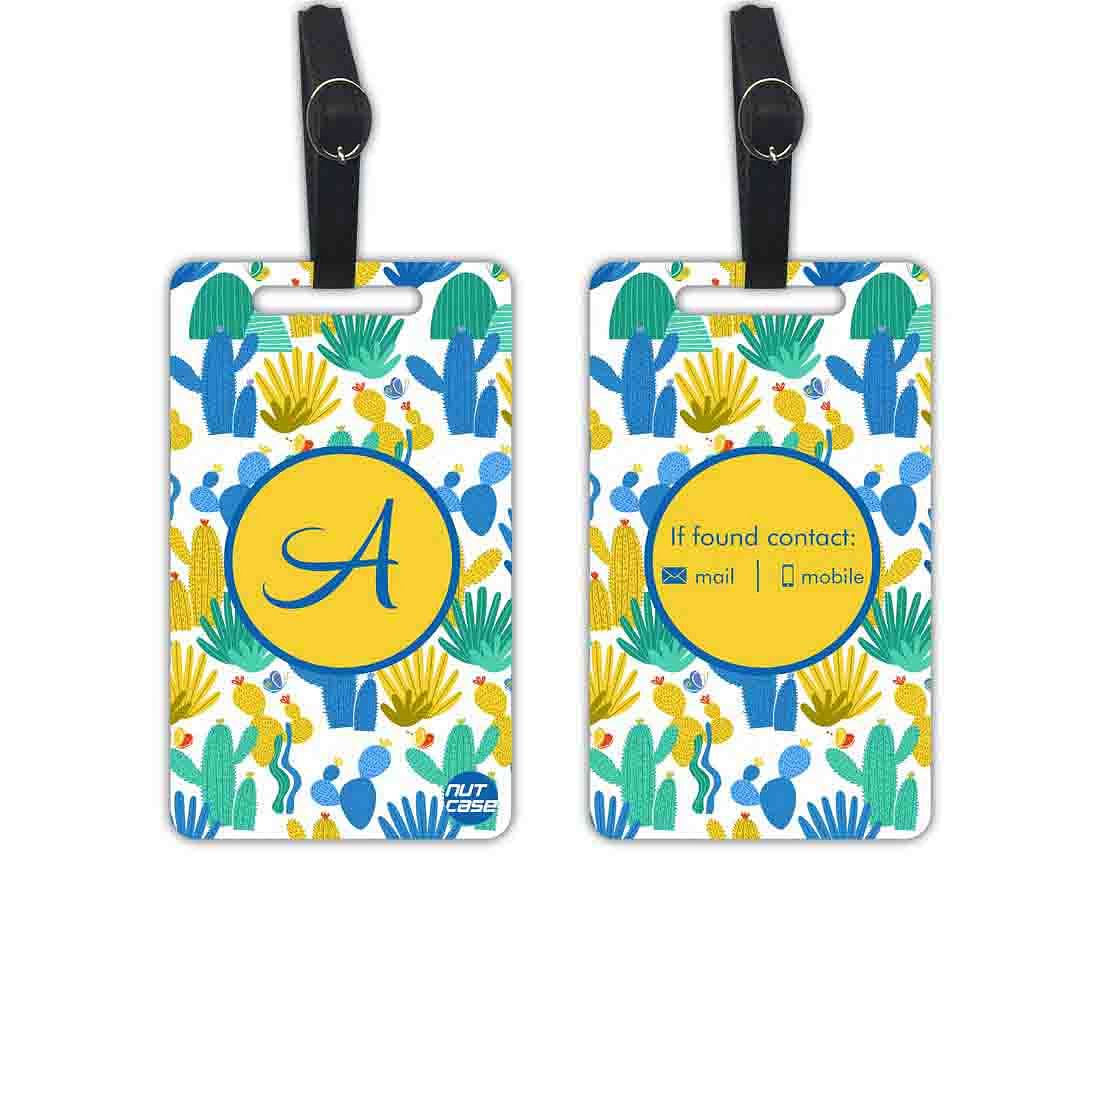 Cool Custom Suitcase Luggage Tag - Add your Name - Set of 2 Nutcase